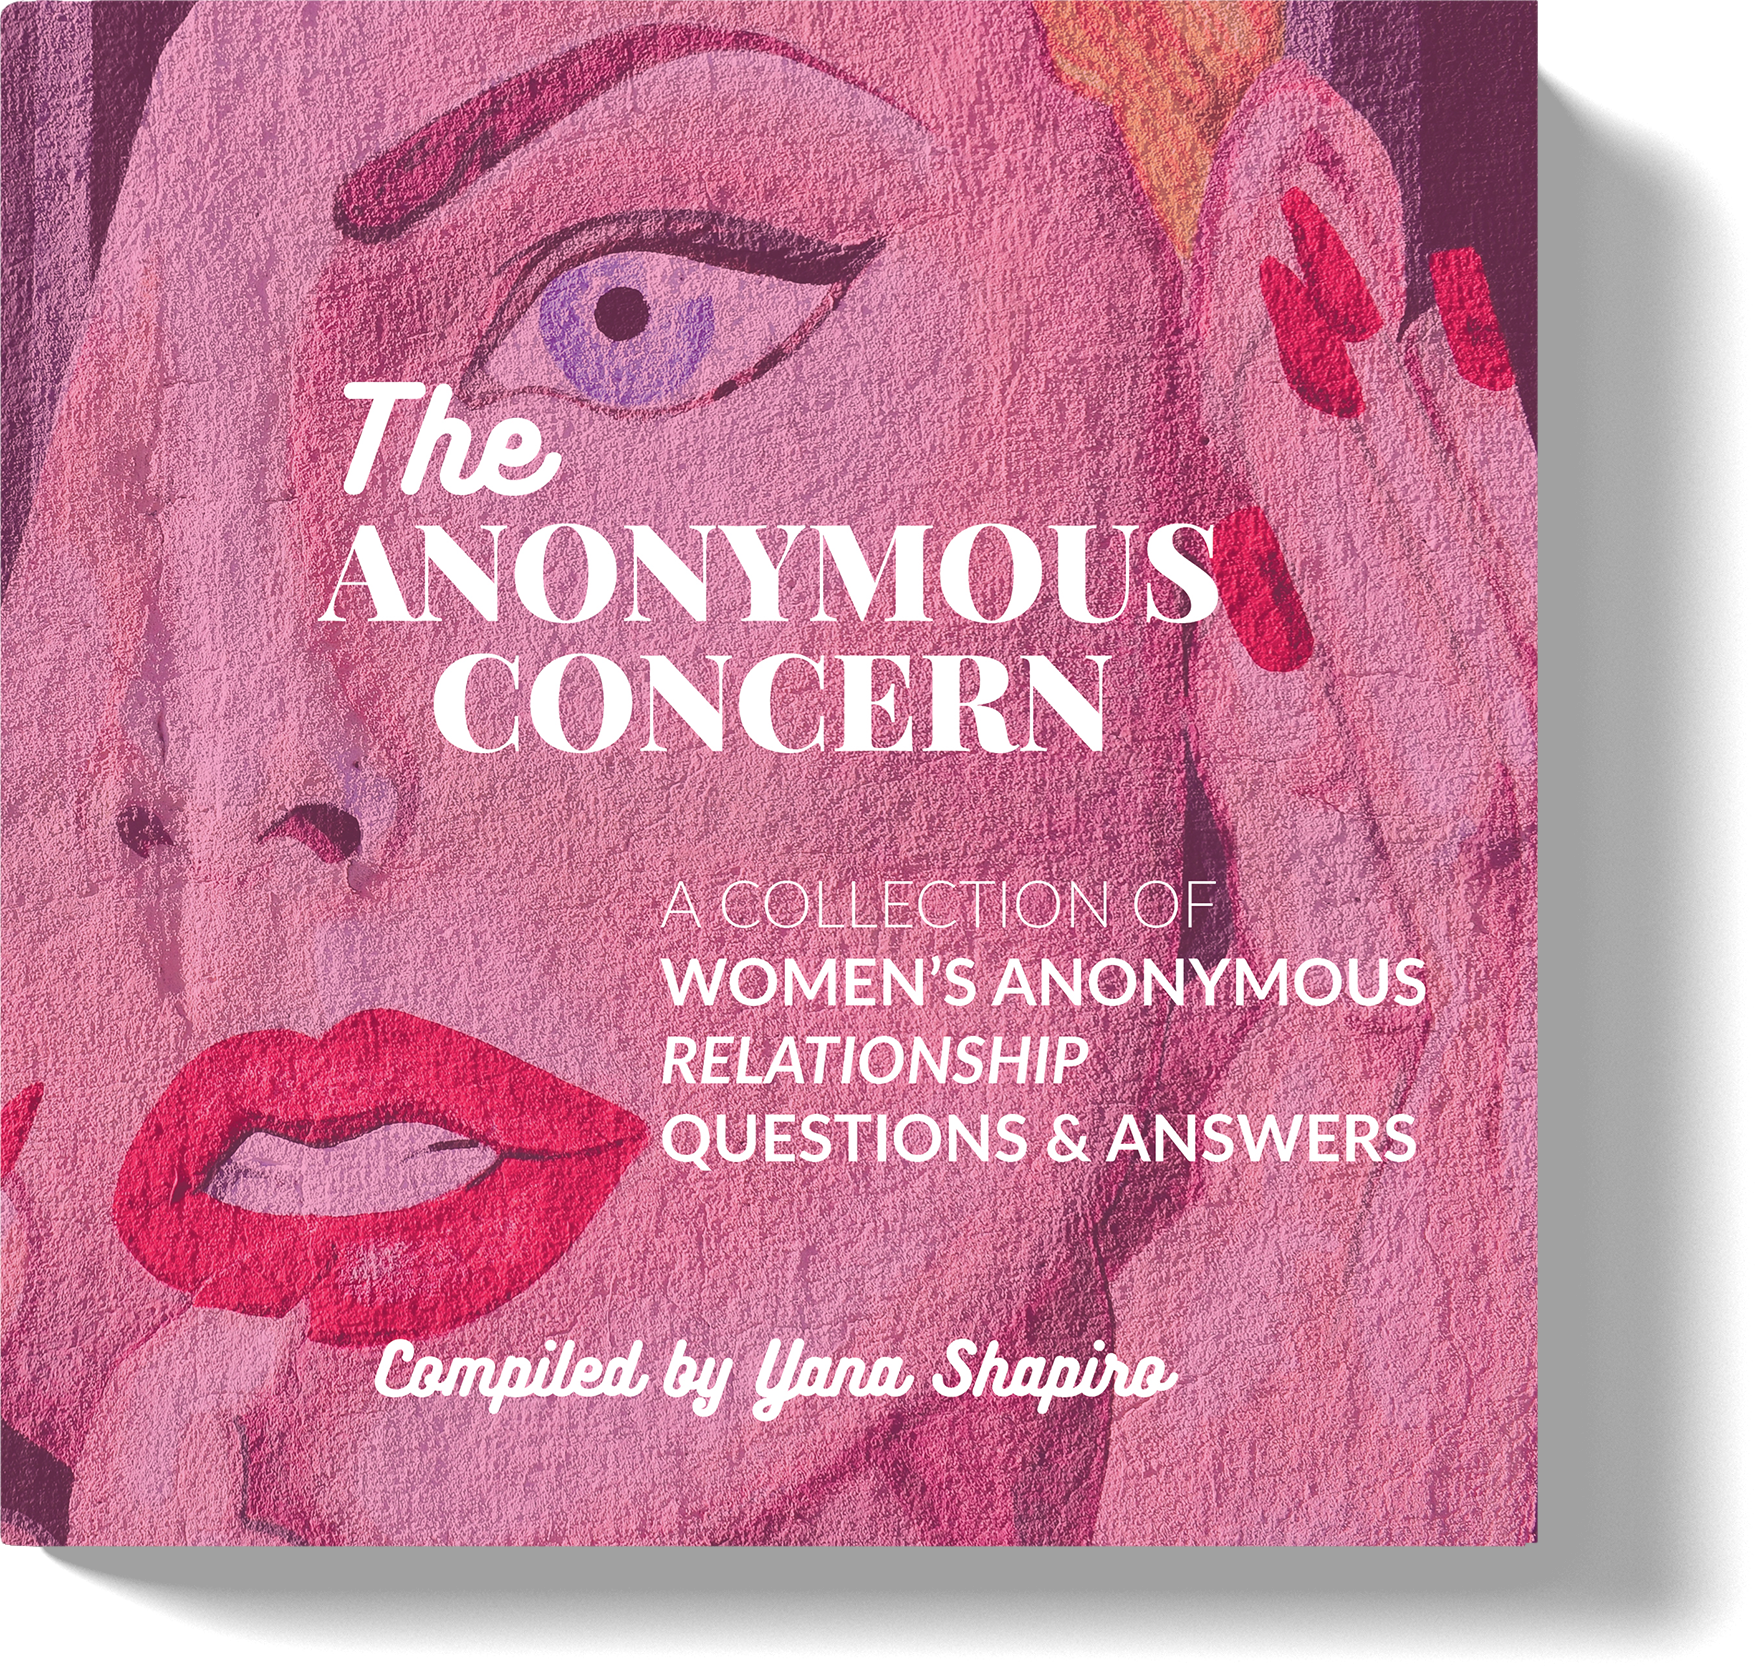 Book Design by Inga Brel for The Anonymous Concern